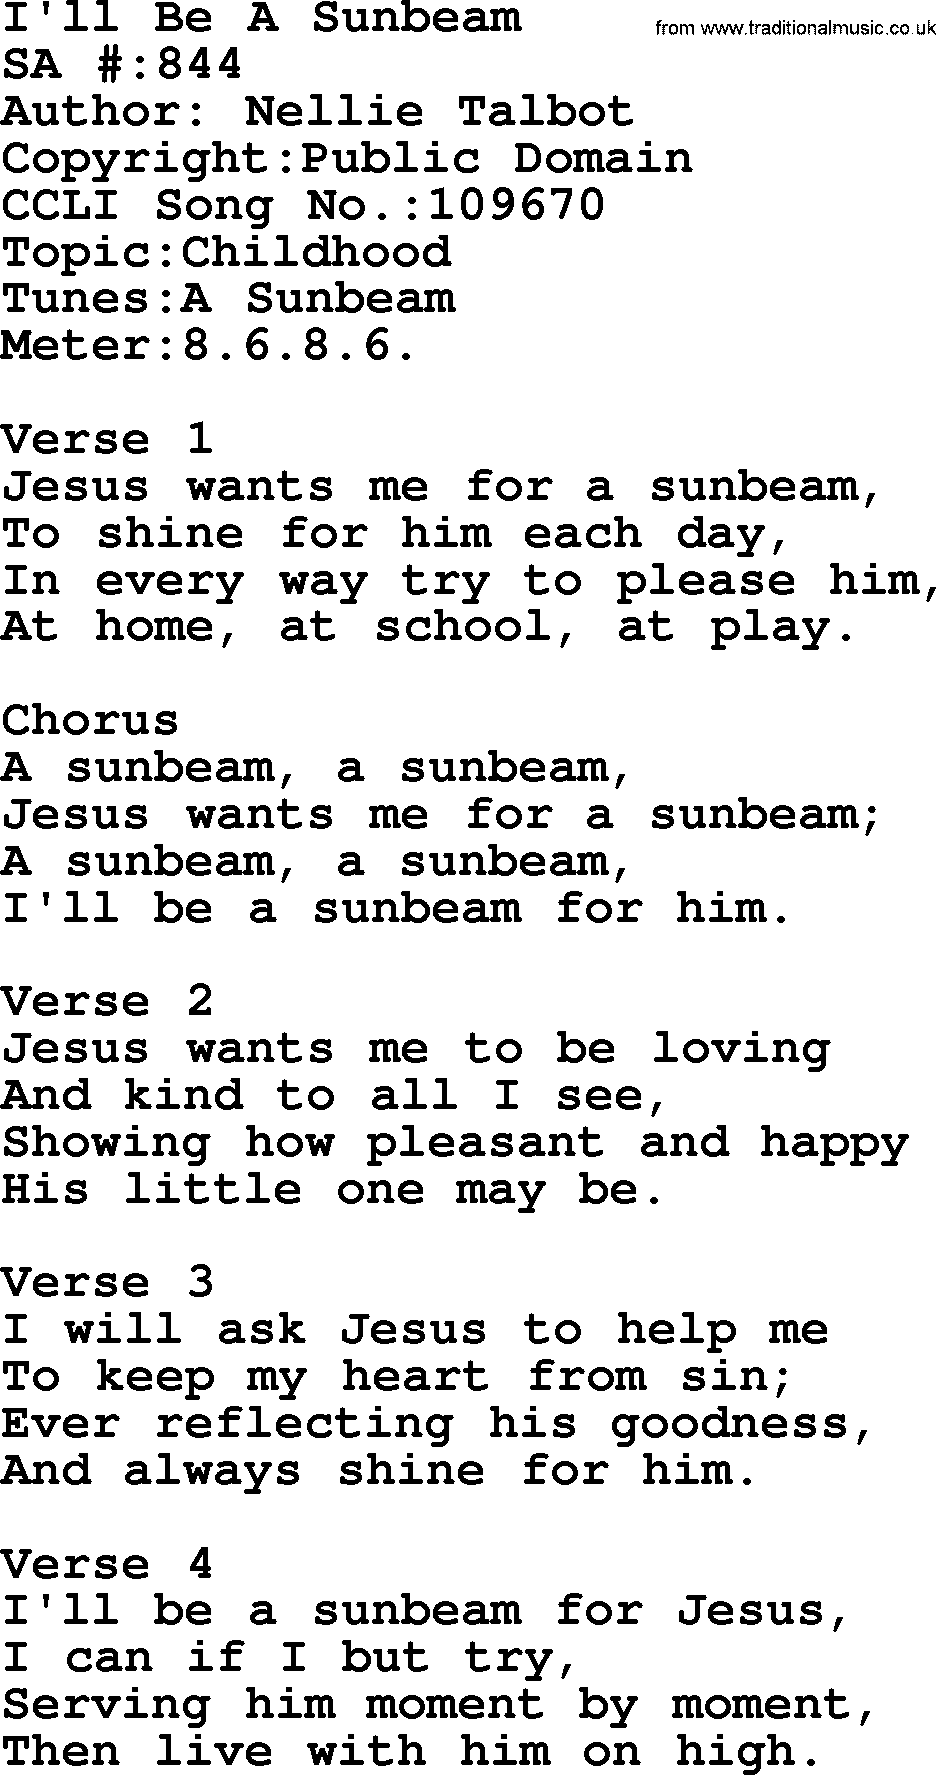 Salvation Army Hymnal, title: I'll Be A Sunbeam, with lyrics and PDF,